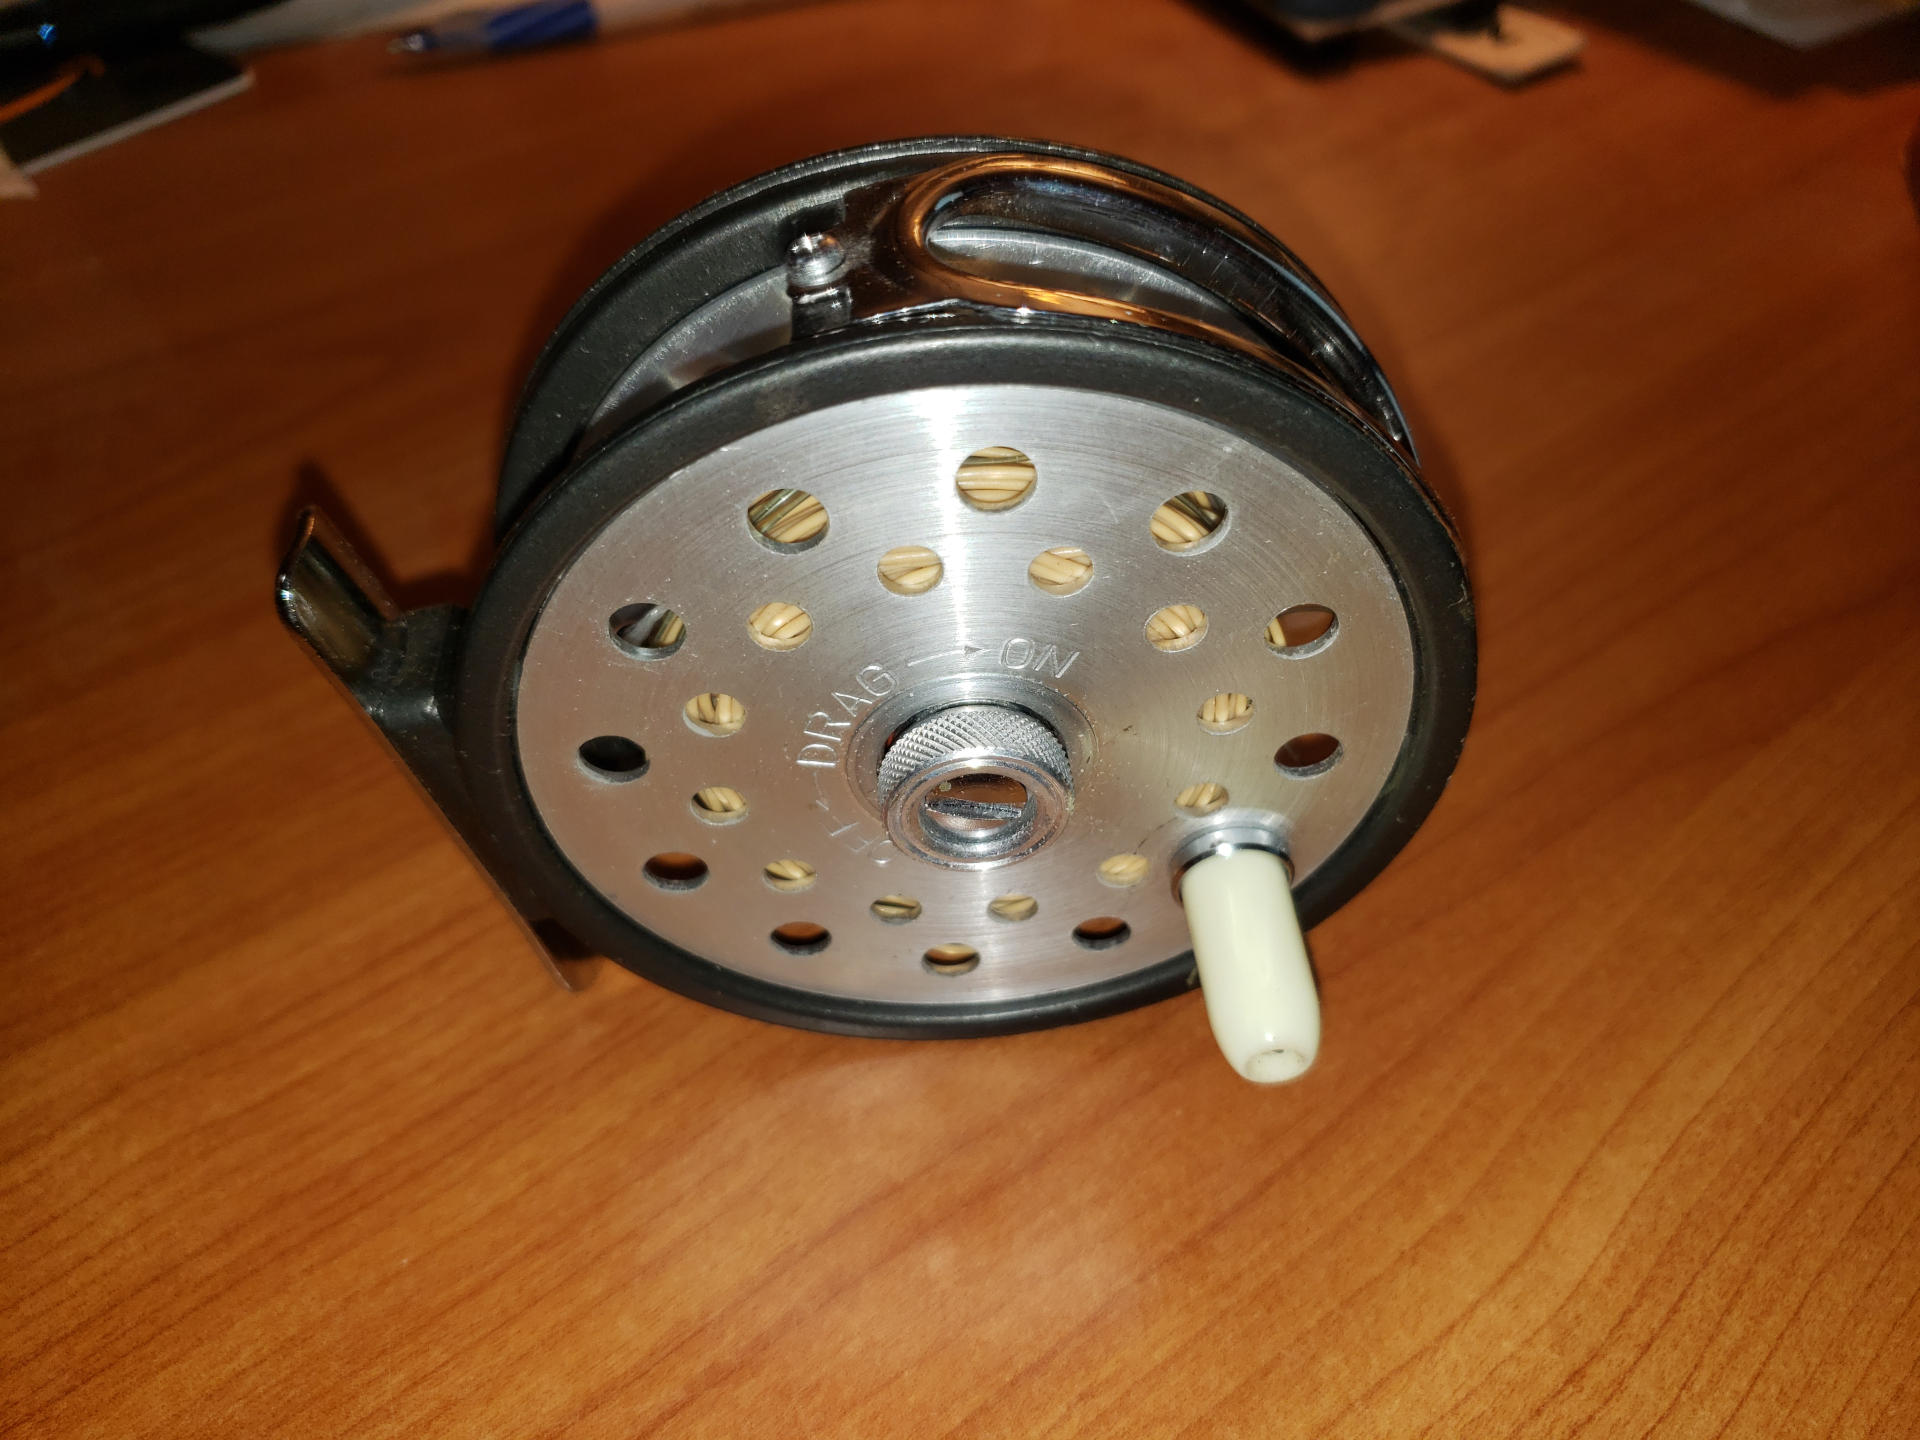 Reel Love; the Fly Reel Picture Thread, Page 93